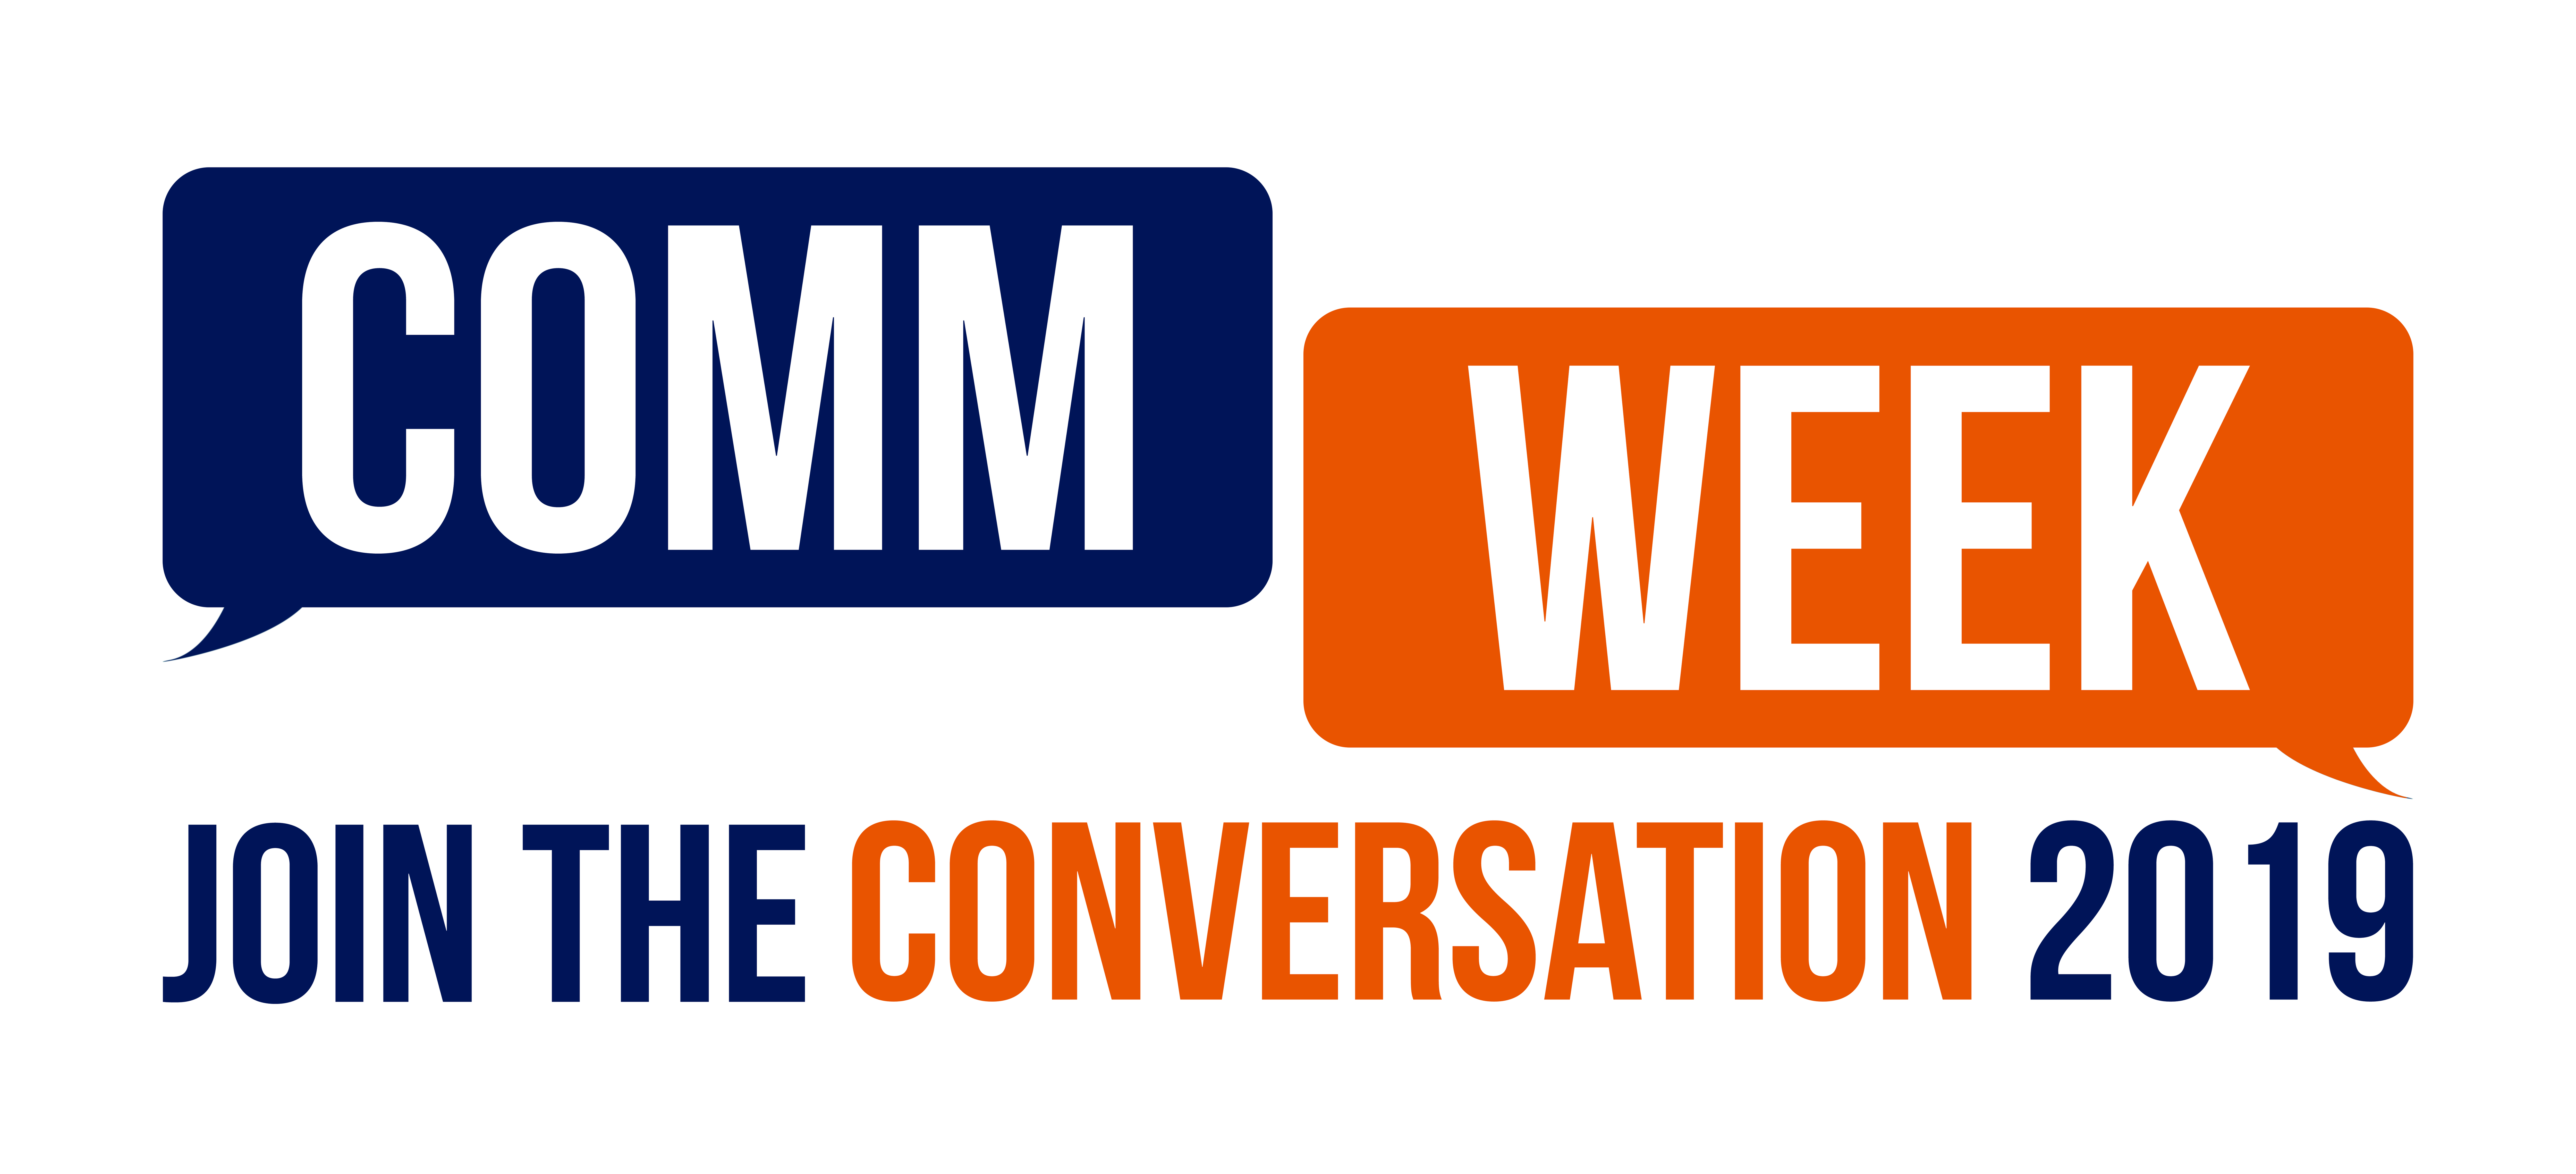 commweek join the conversation 2019